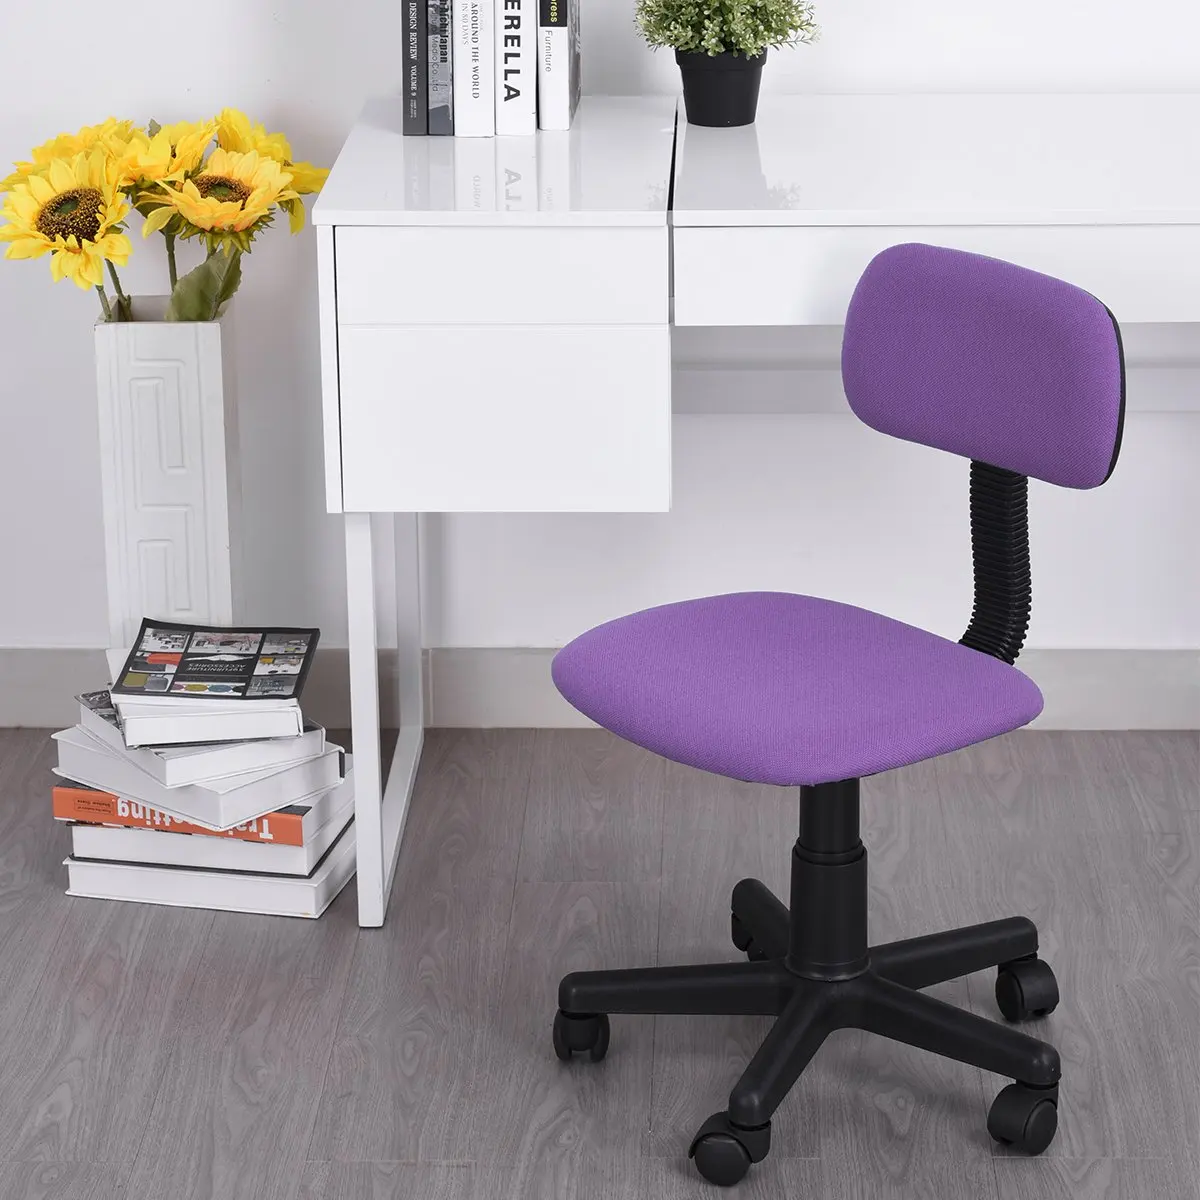 Cheap Desk Chairs Staples Find Desk Chairs Staples Deals On Line